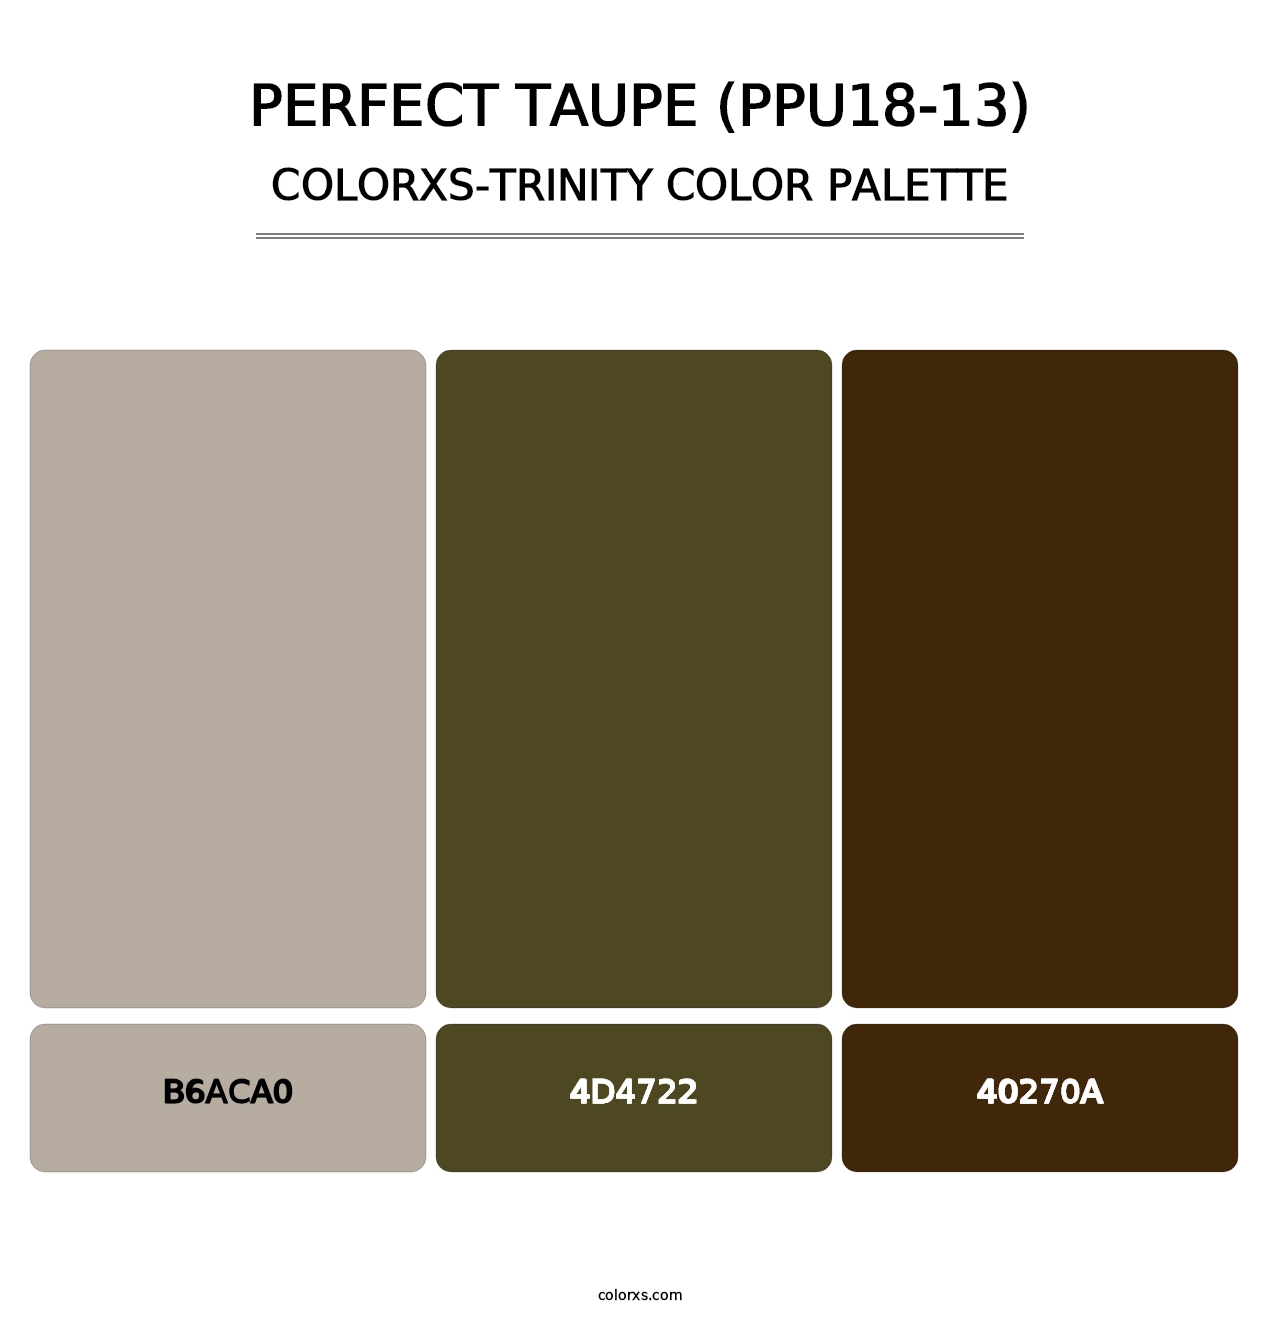 Perfect Taupe (PPU18-13) - Colorxs Trinity Palette